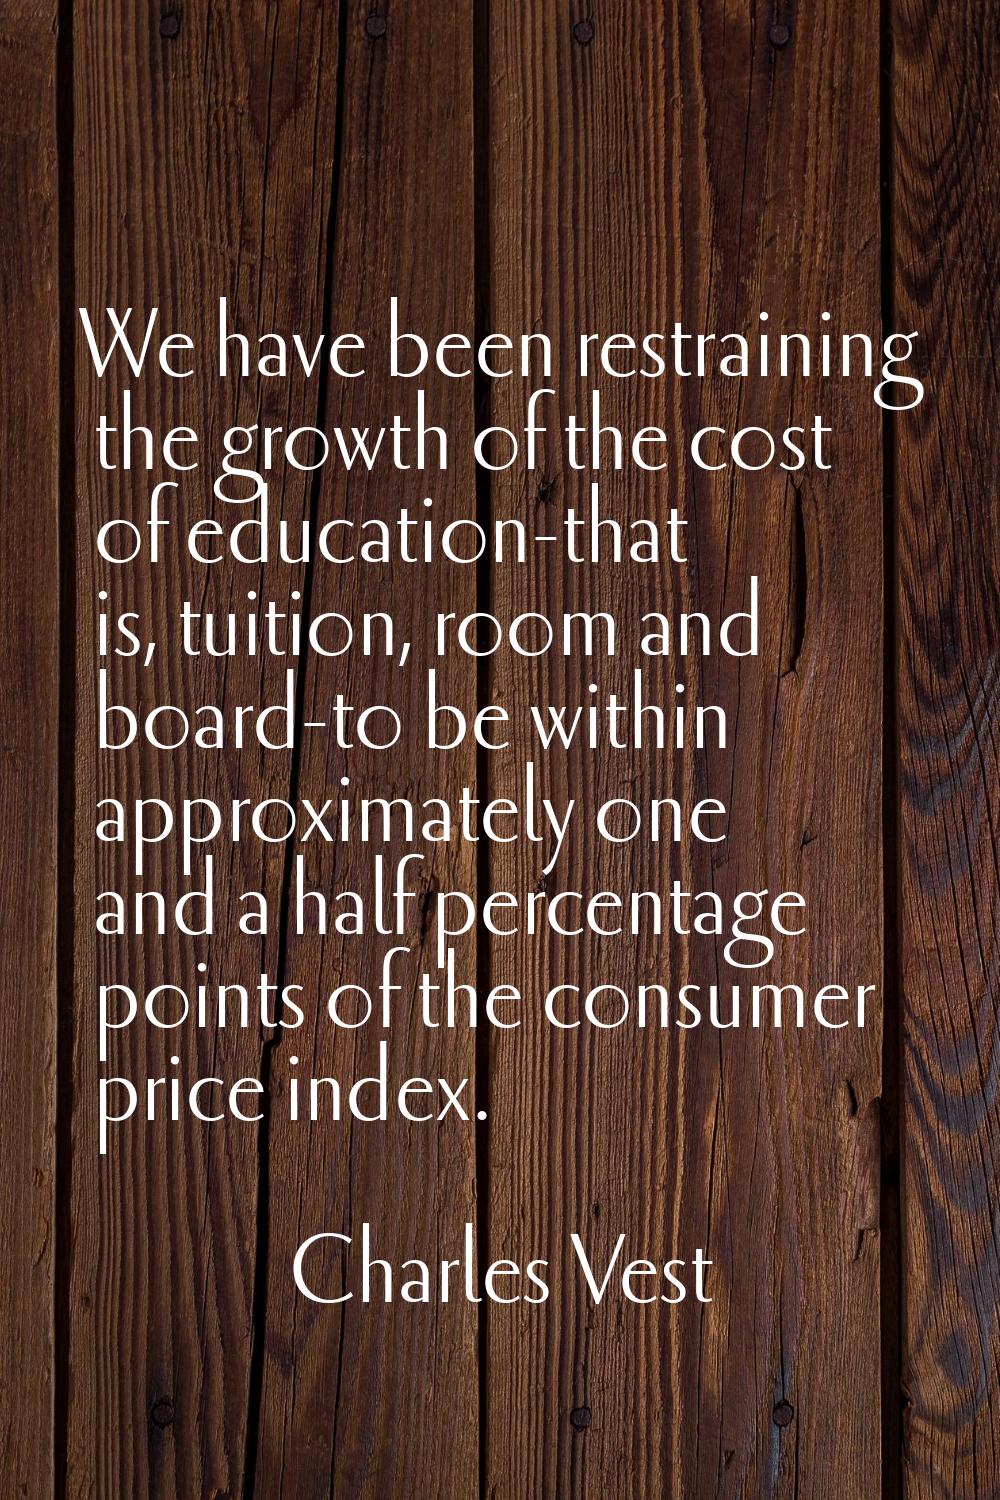 We have been restraining the growth of the cost of education-that is, tuition, room and board-to be